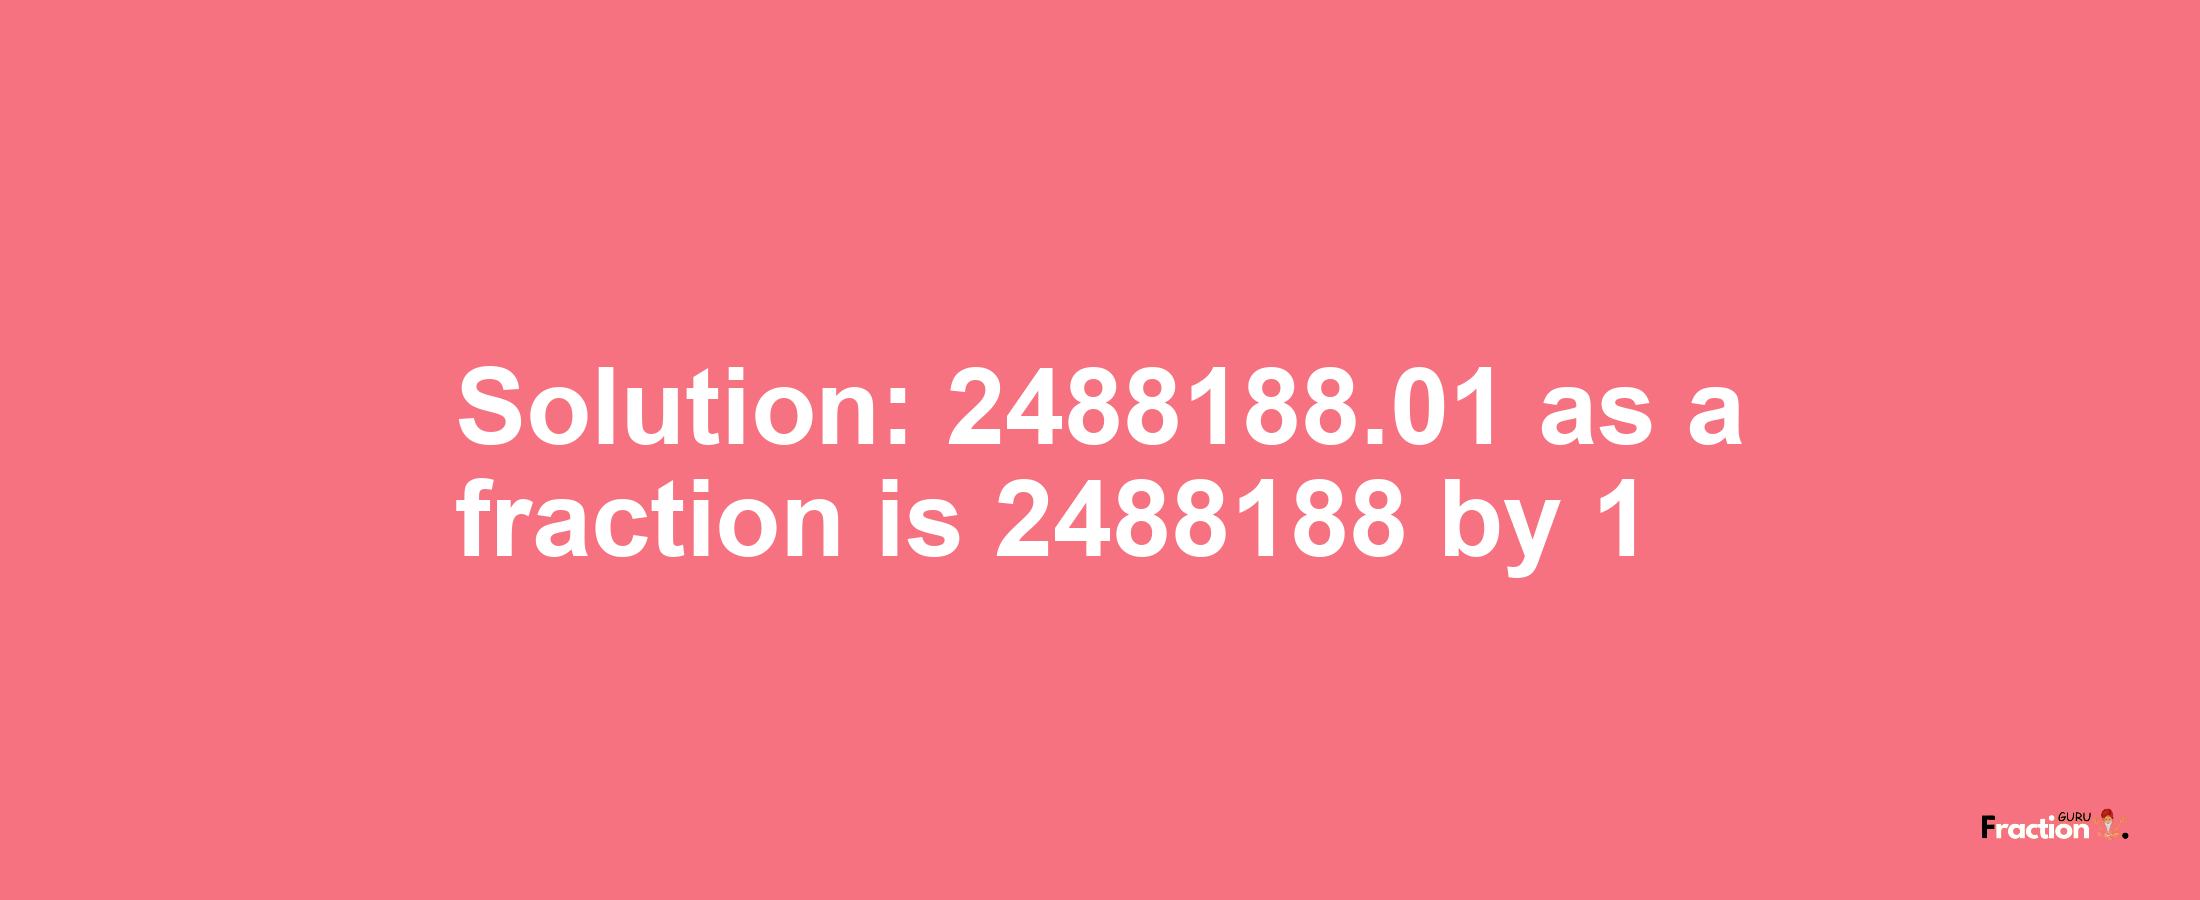 Solution:2488188.01 as a fraction is 2488188/1